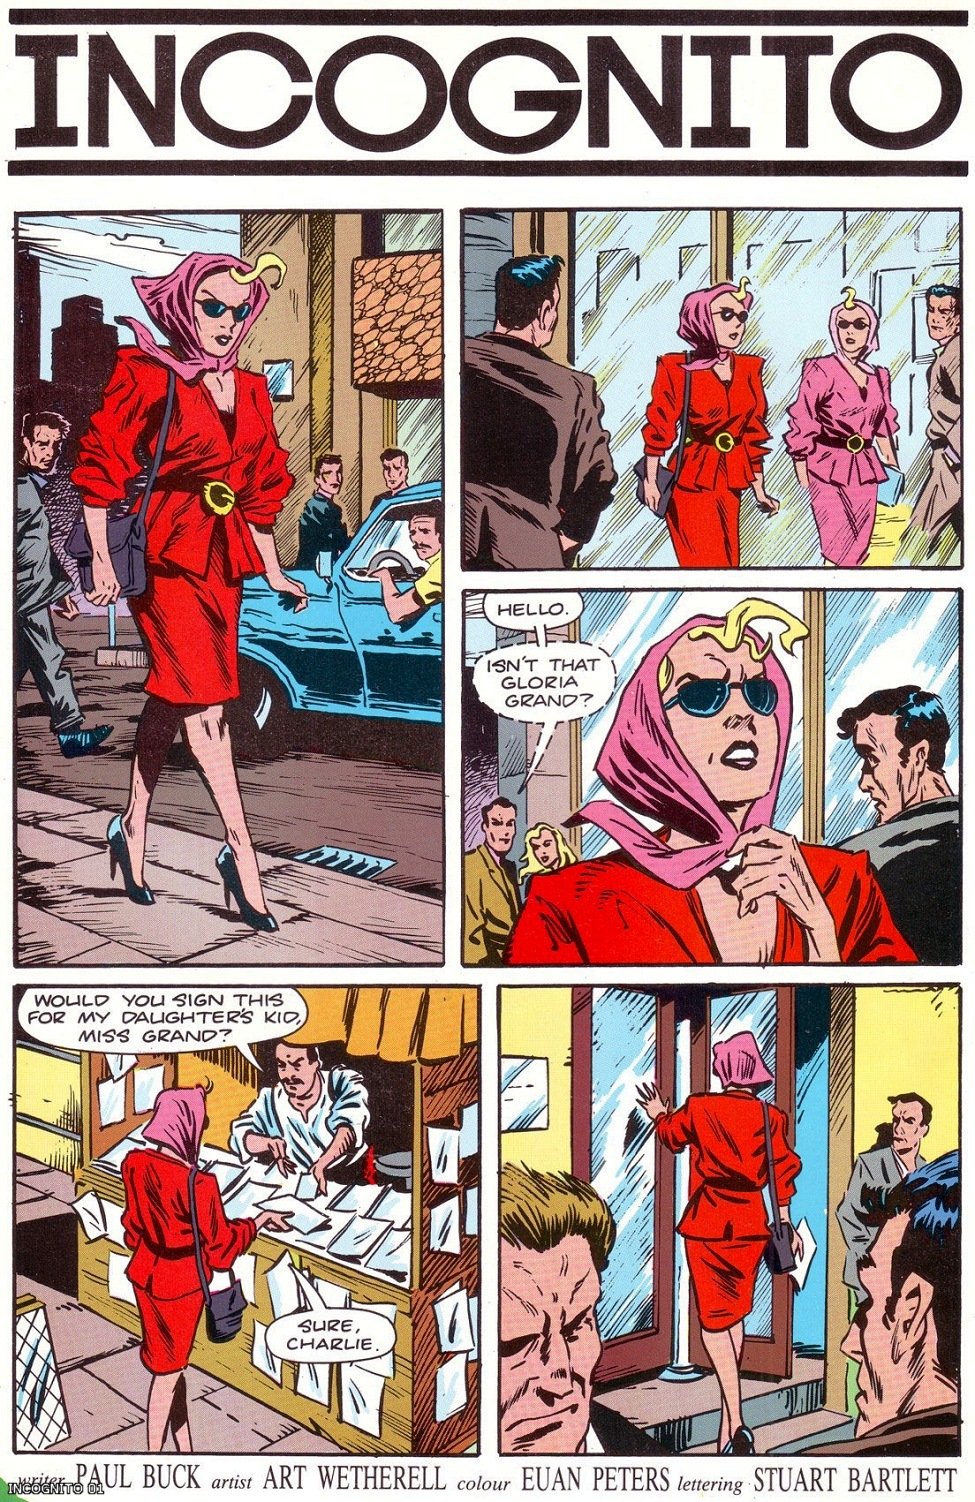 The opening page of "Incognito", a creator-owned story for Marvel UK's STRIP written by Paul Buck with art Art Wetherell for STRIP #1, published in 1990